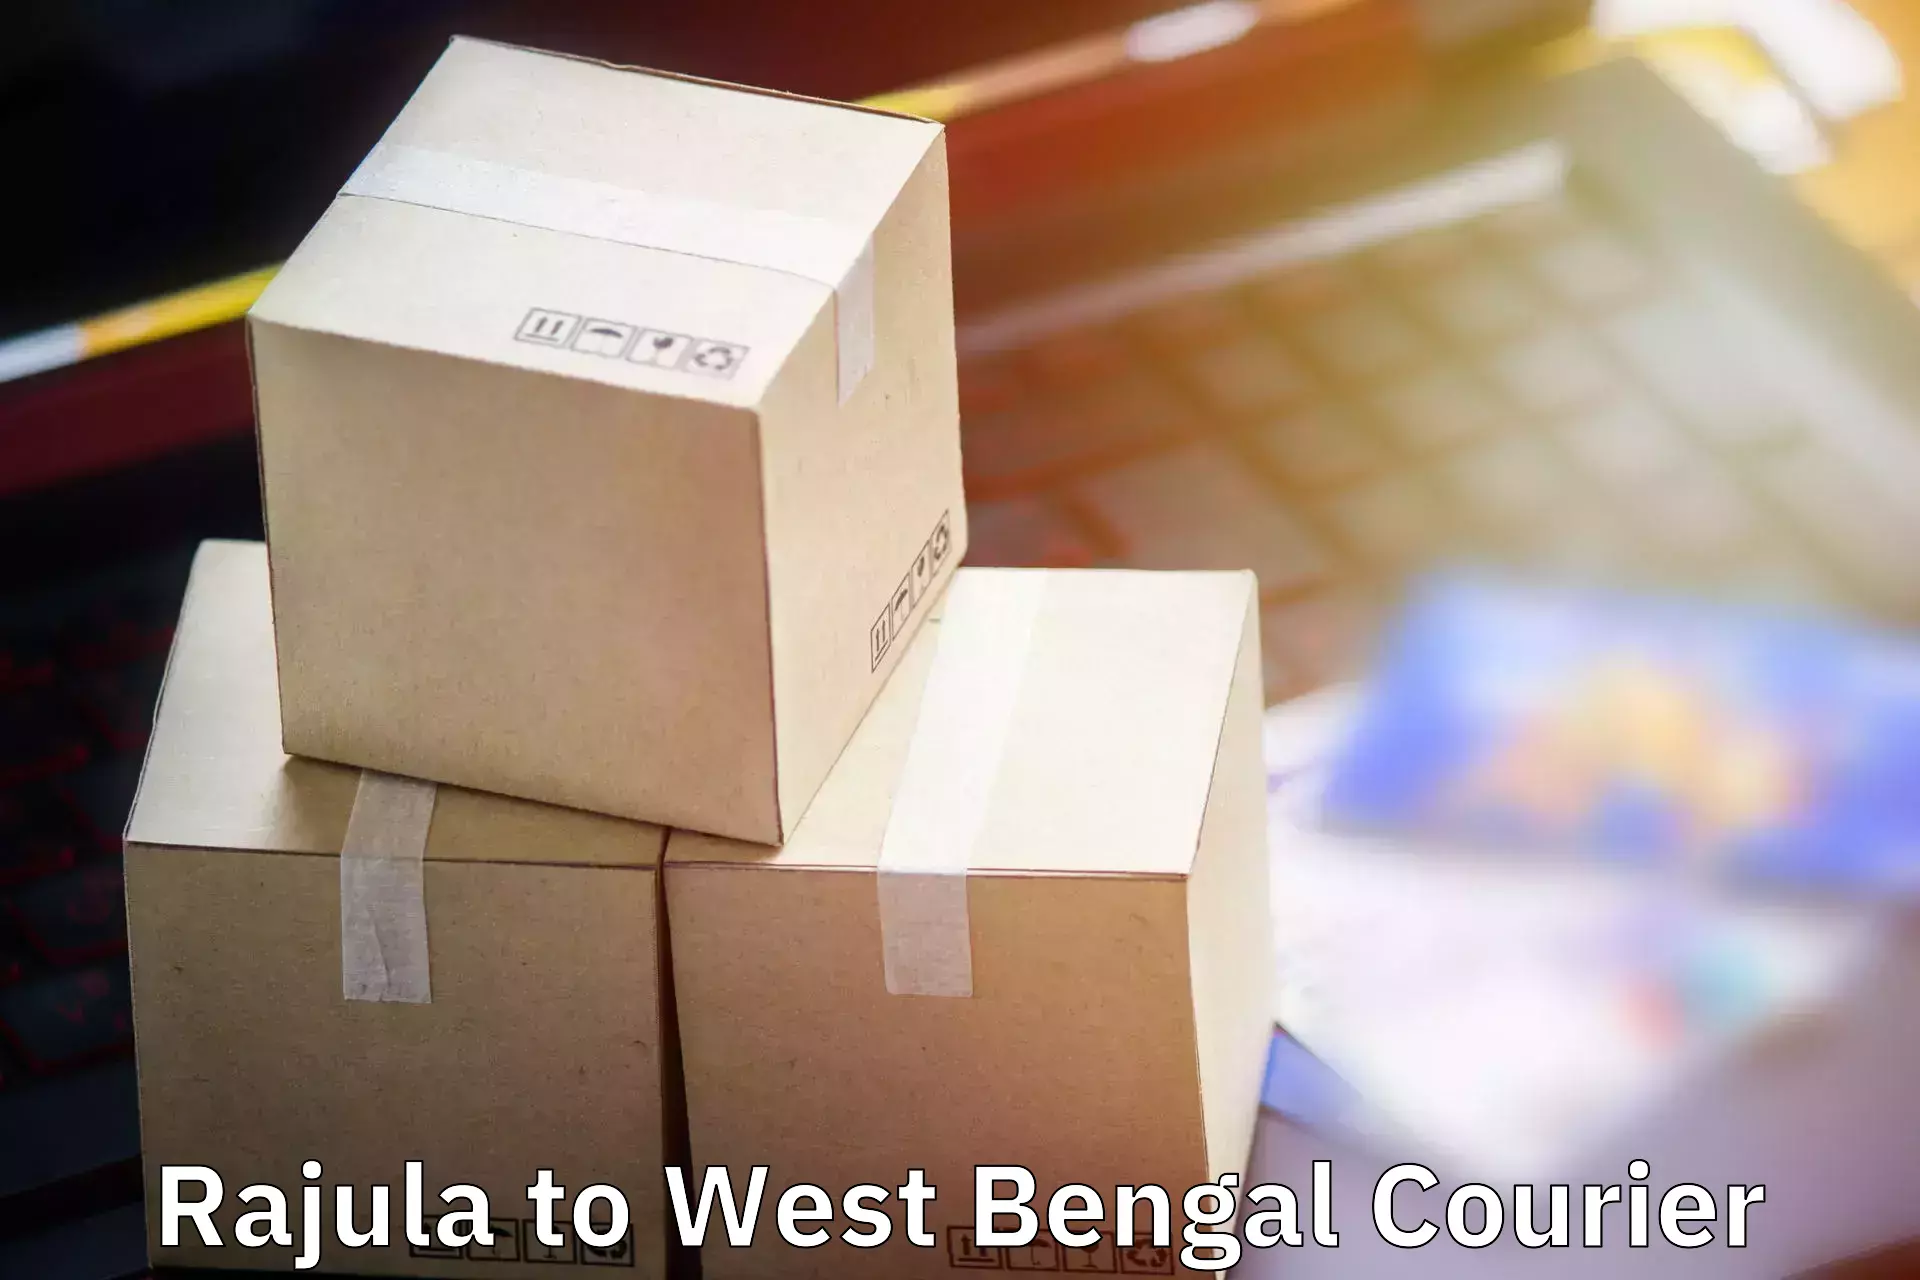 Luggage transport consultancy Rajula to West Bengal